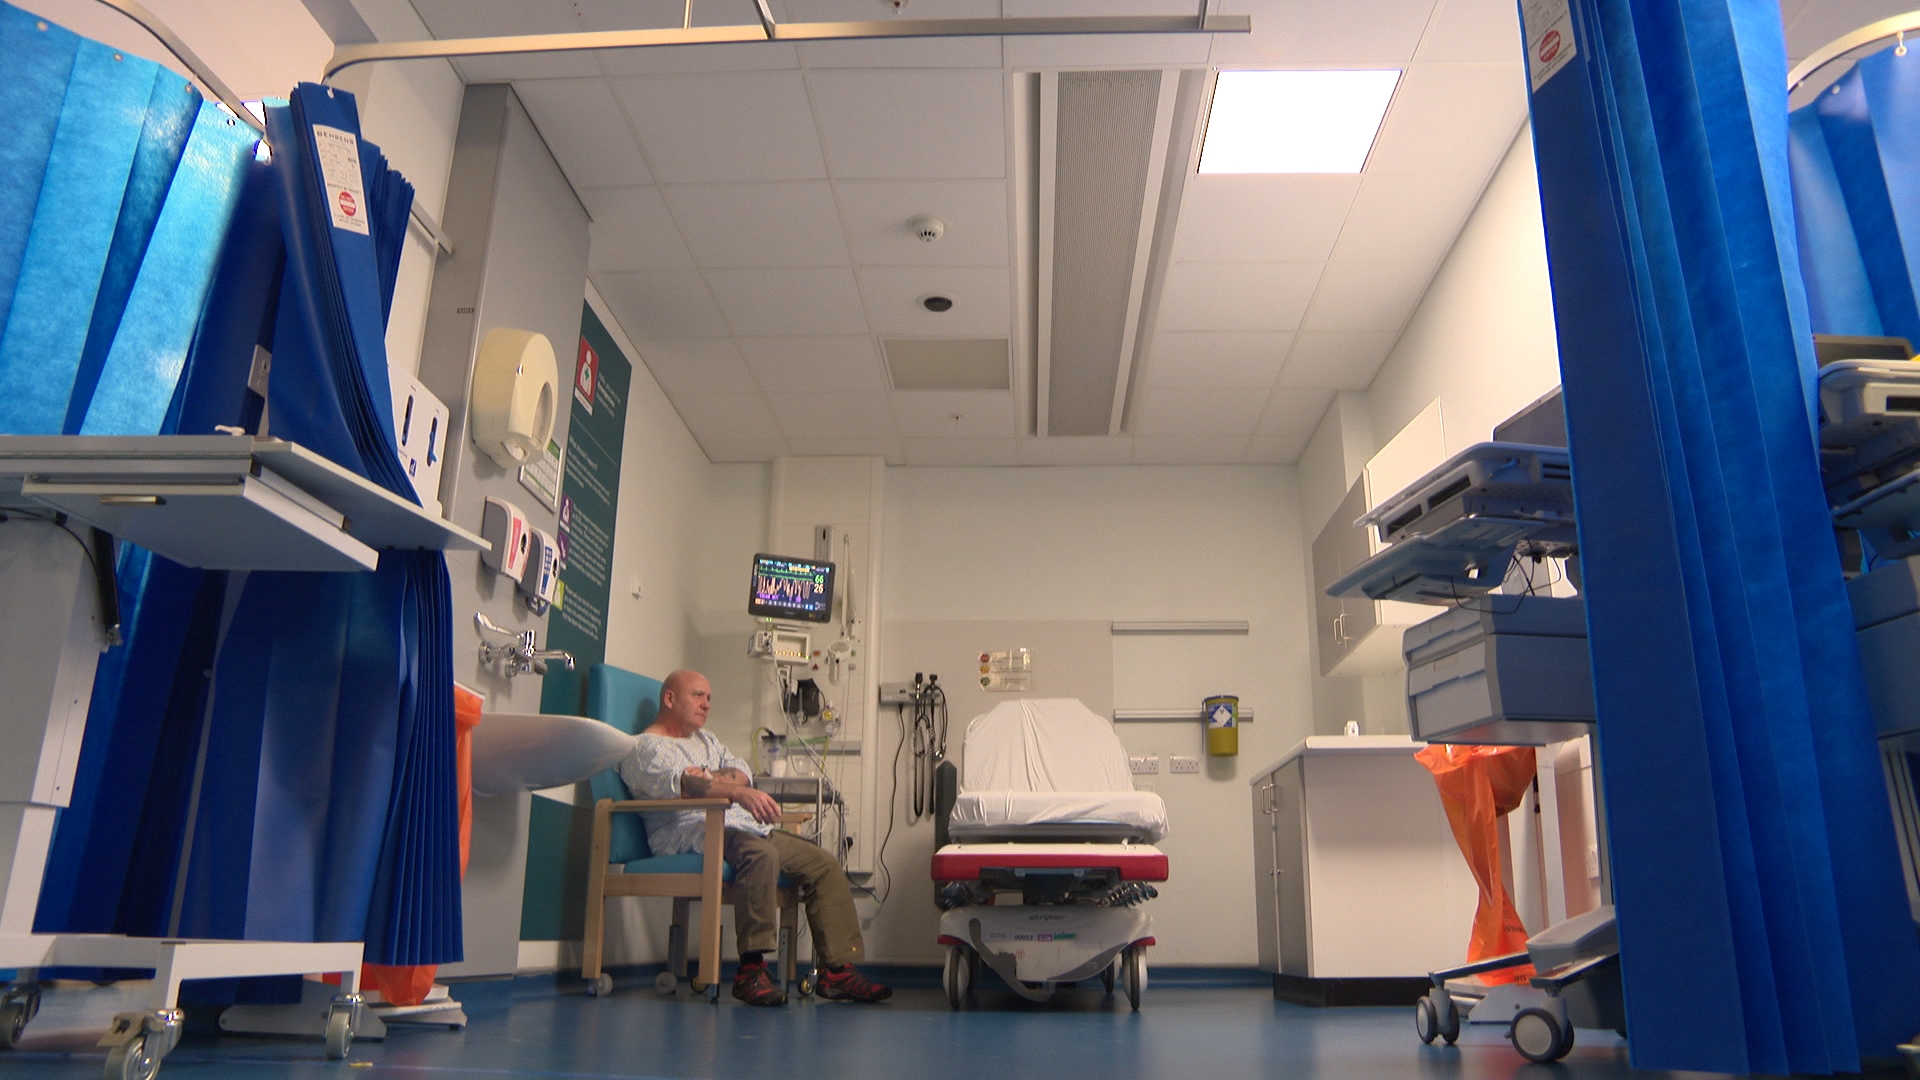 The ward's 12 beds can see 200 patients each day.